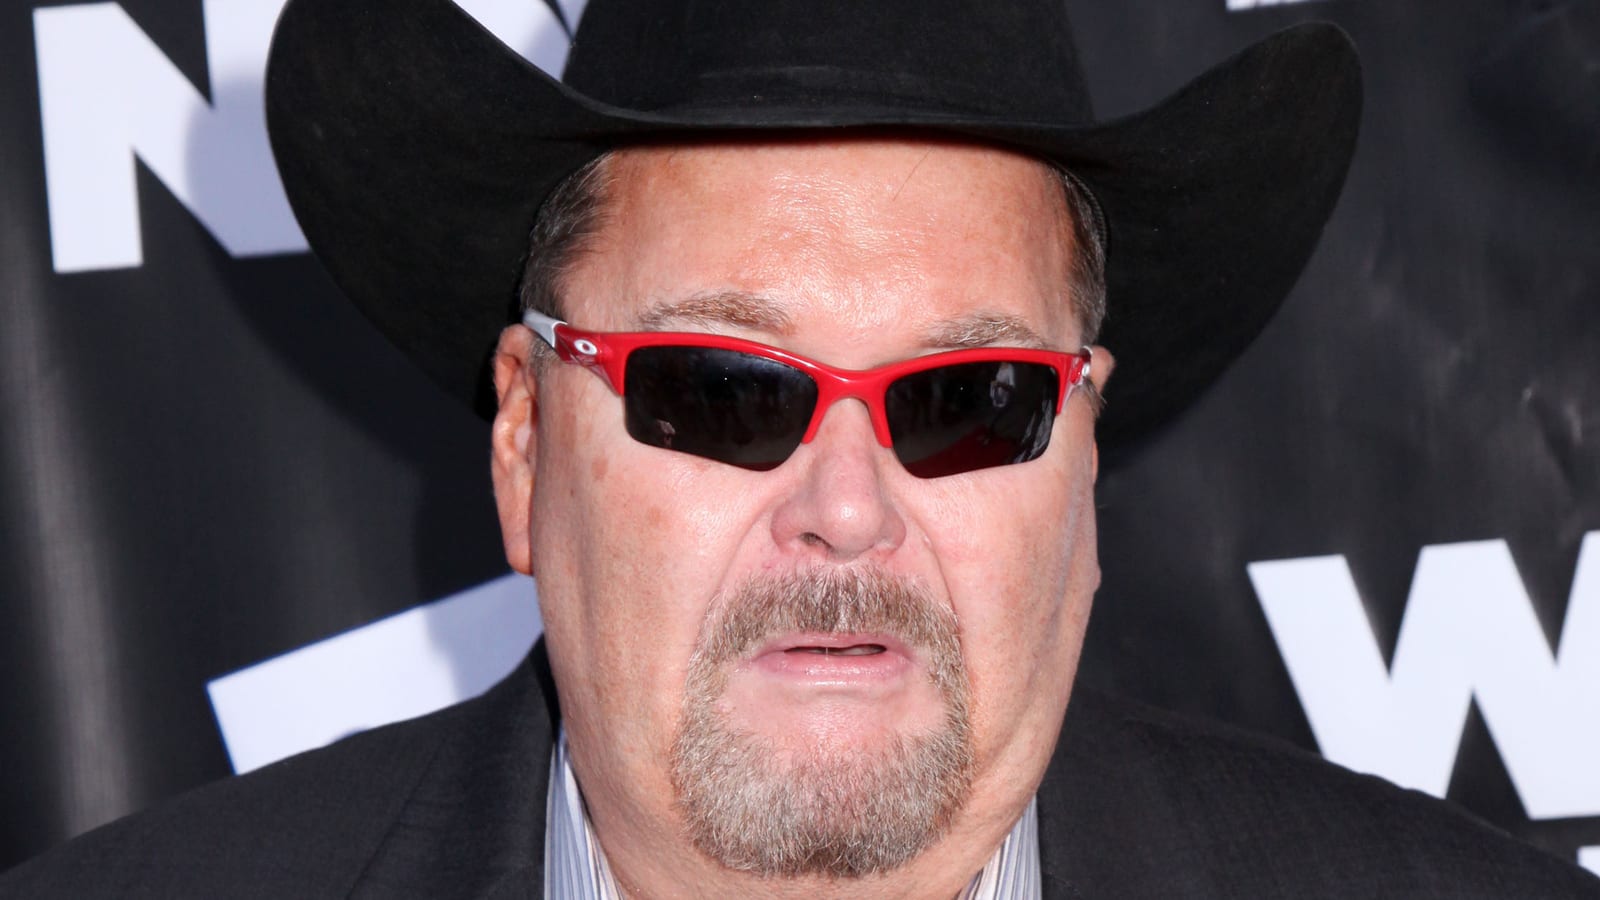 WWE broadcaster Jim Ross wants to call Pirates games